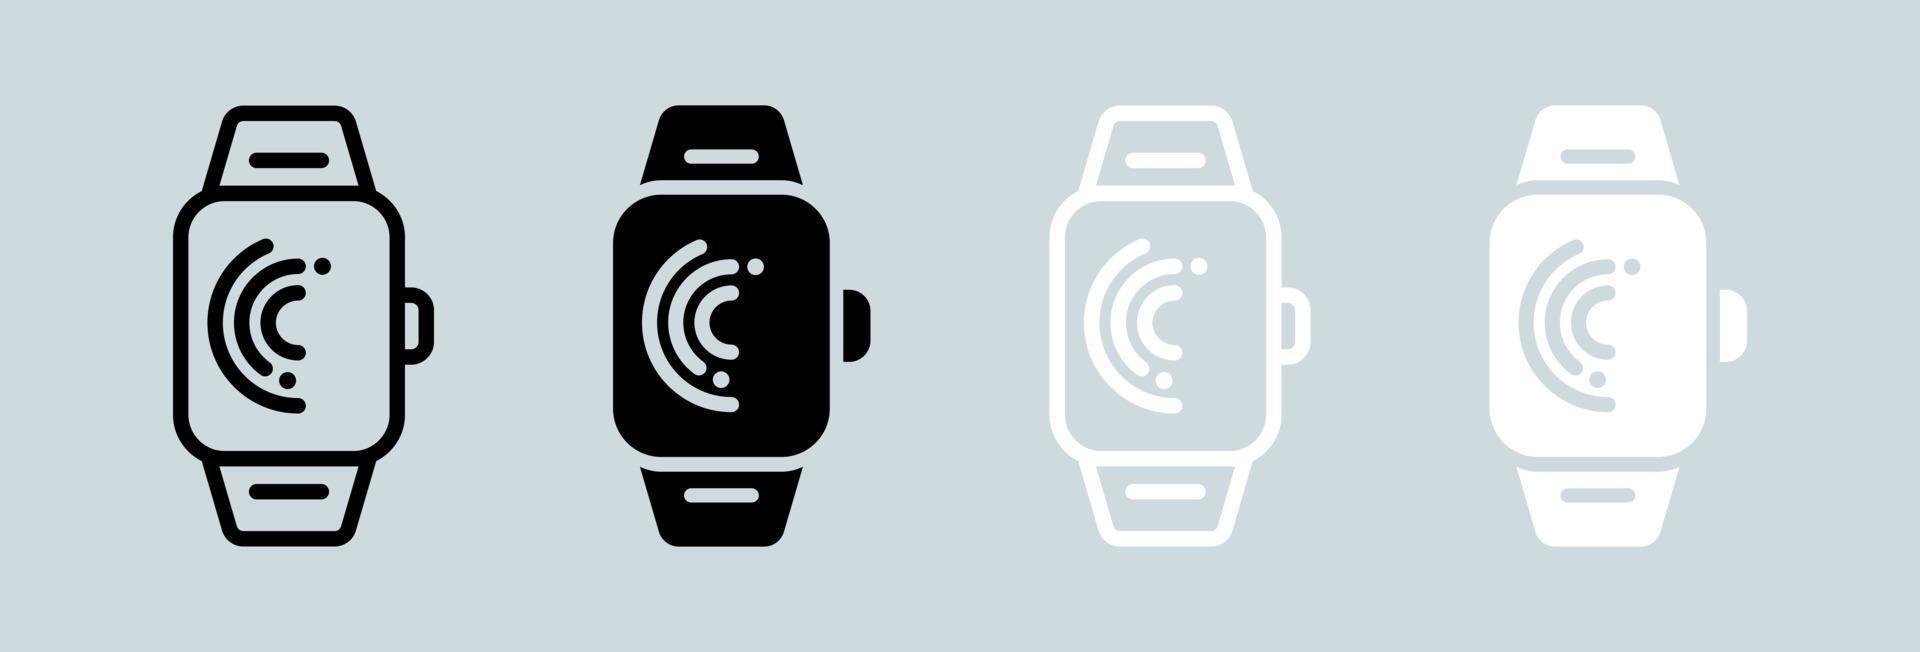 Smartwatch icon set in black and white. Smart watch signs vector illustration.